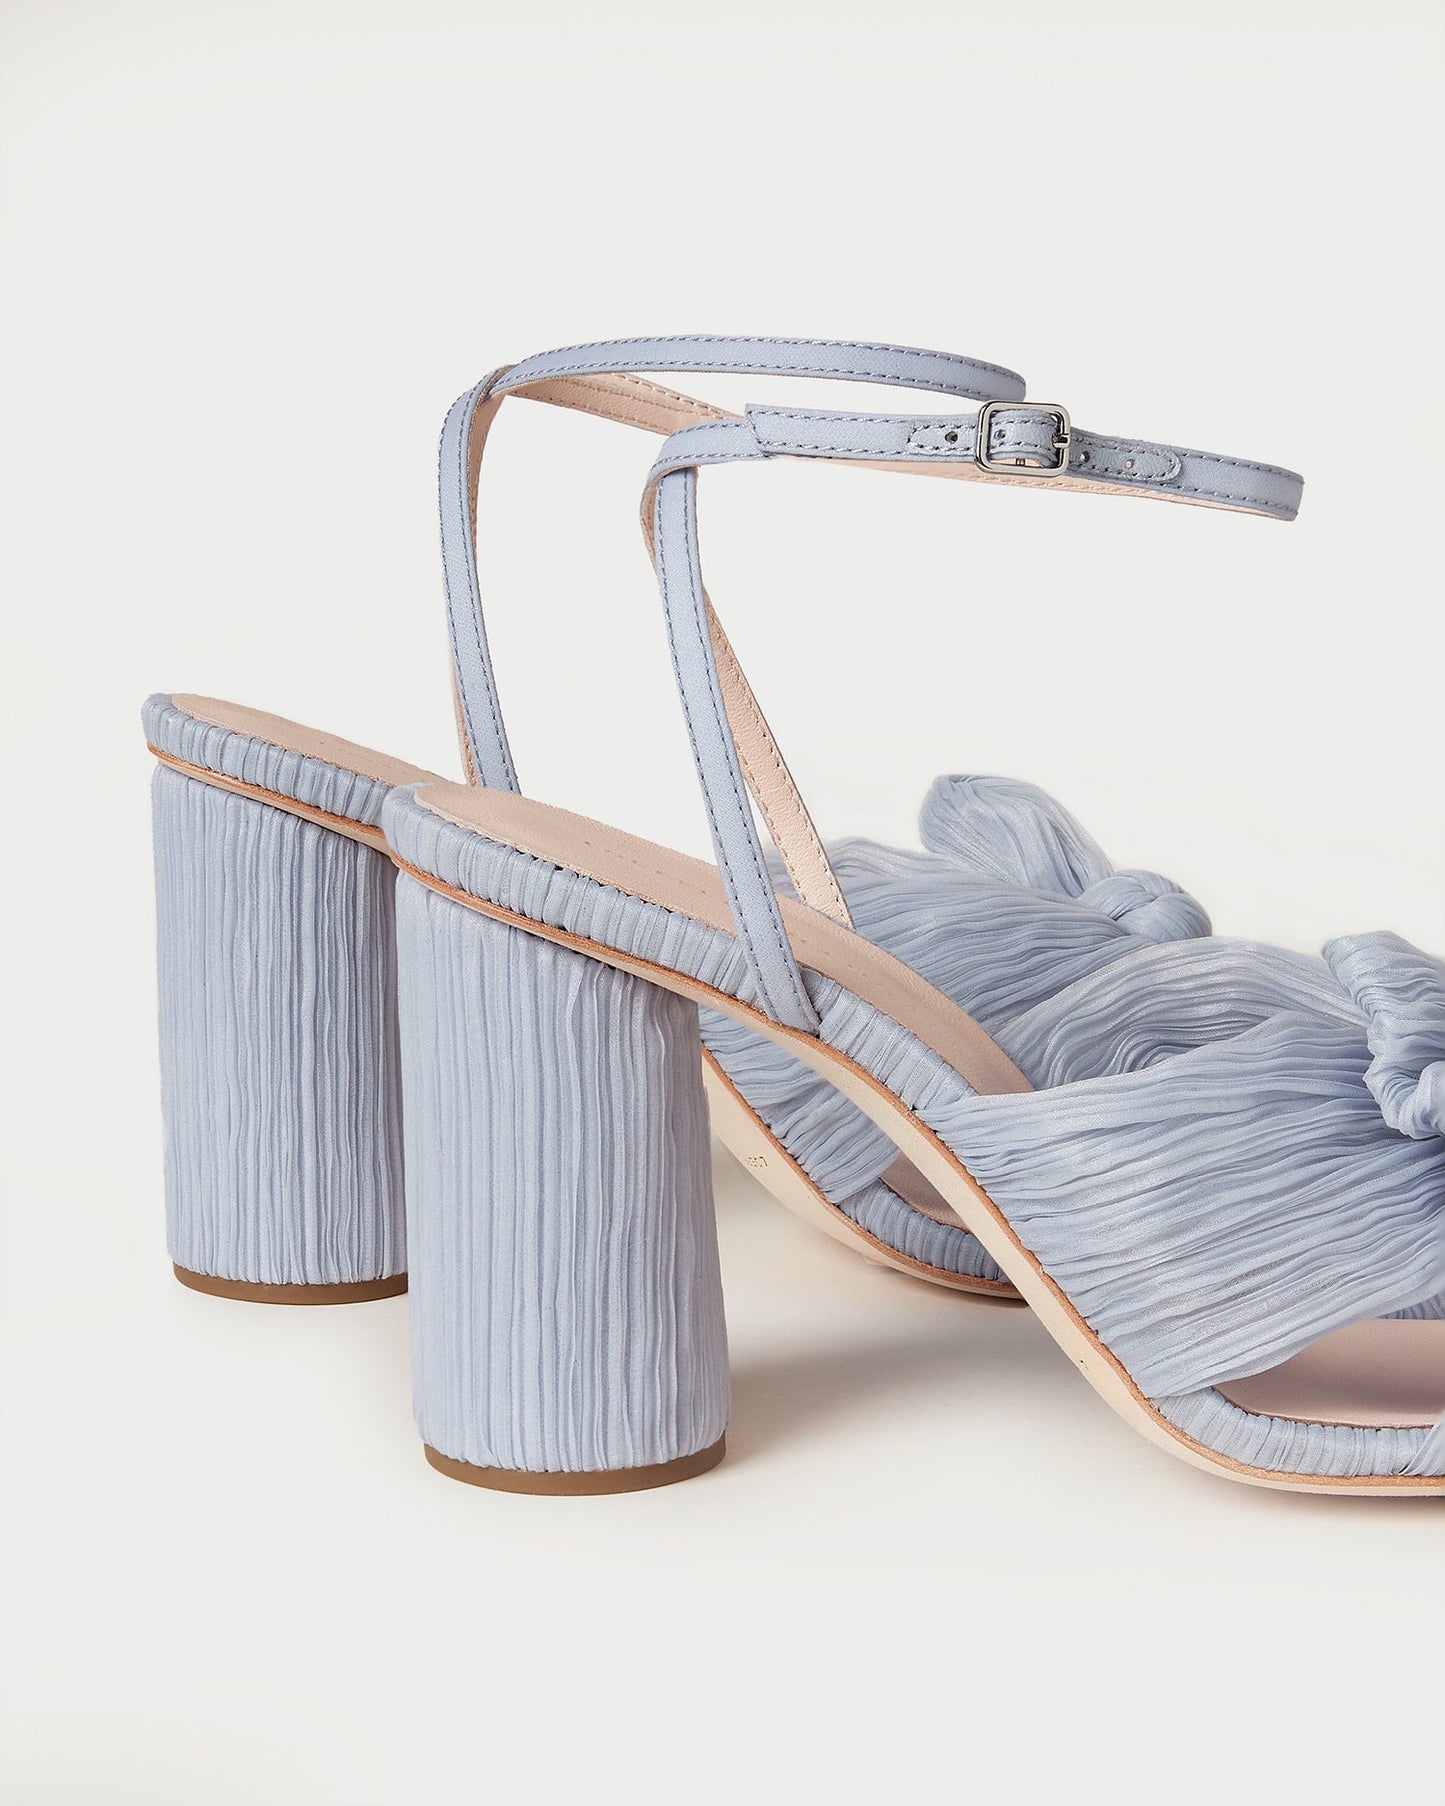 Loeffler Randall Camellia Bow Heel with Ankle Strap in Blue